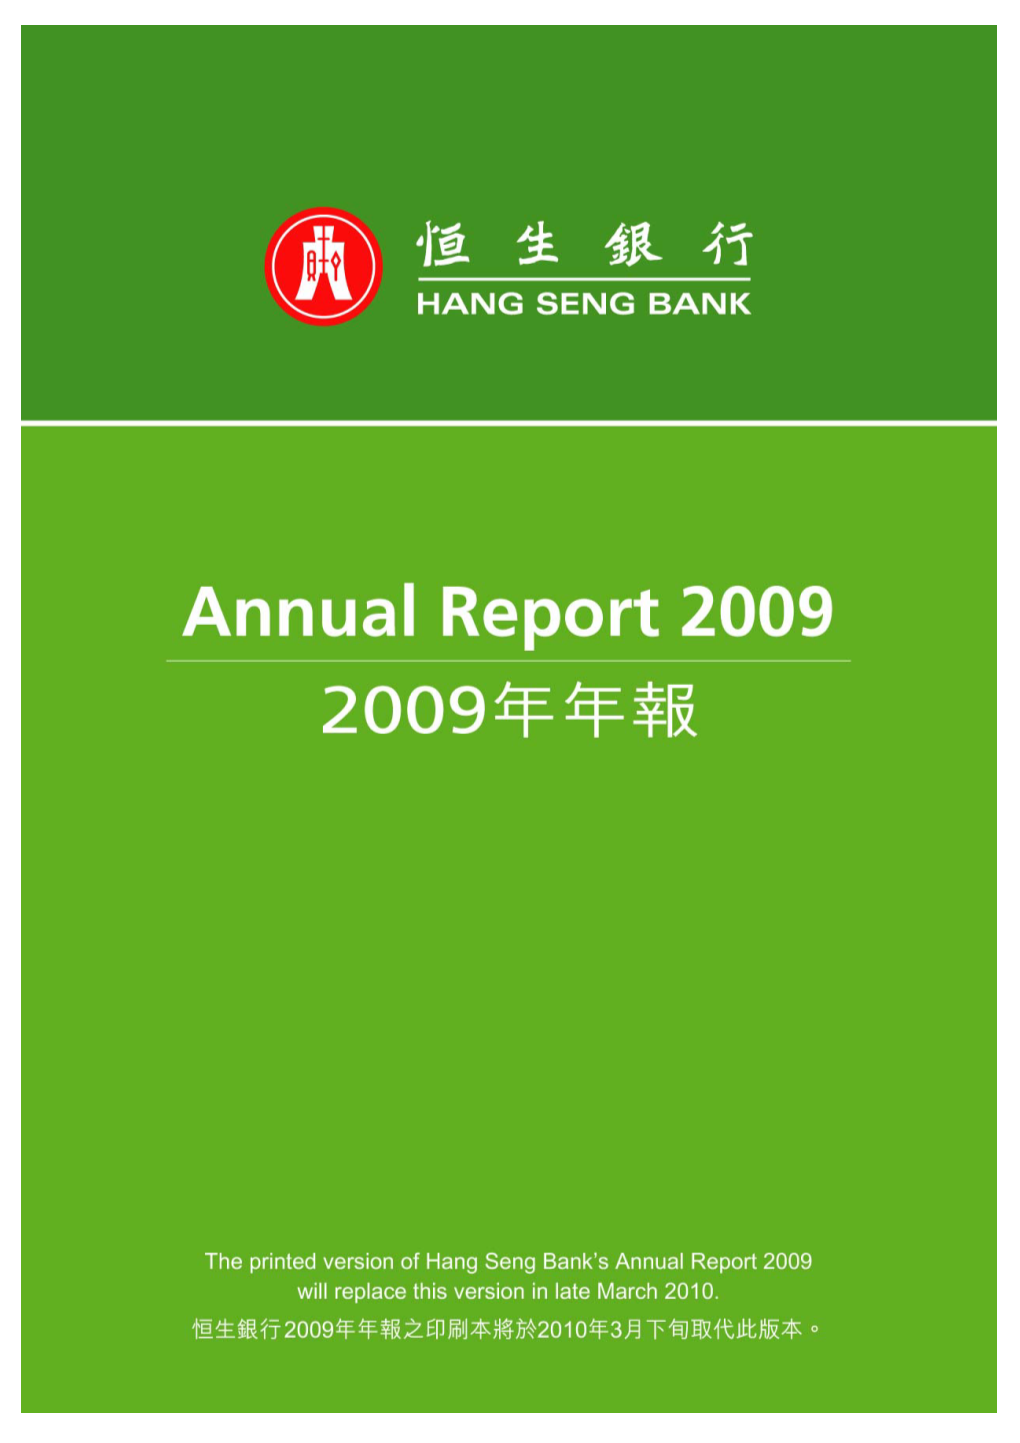 2009 Annual Report, and in Note 62 to the Bank’S 2009 Financial Statements